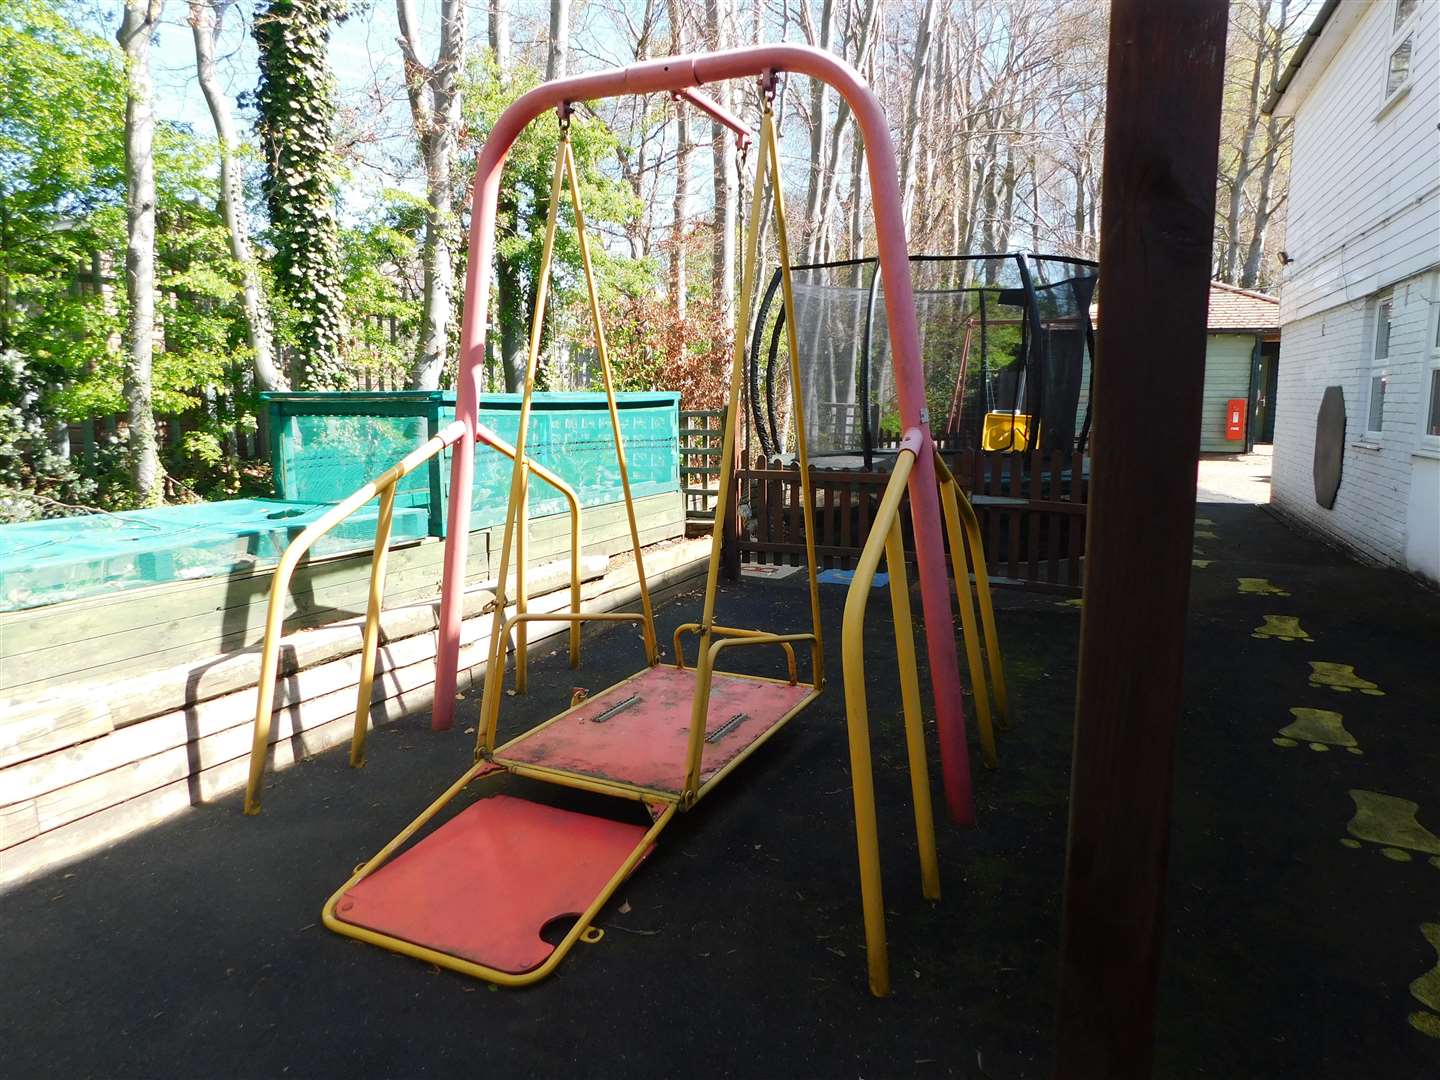 The money will help buy new play equipment all the children can enjoy